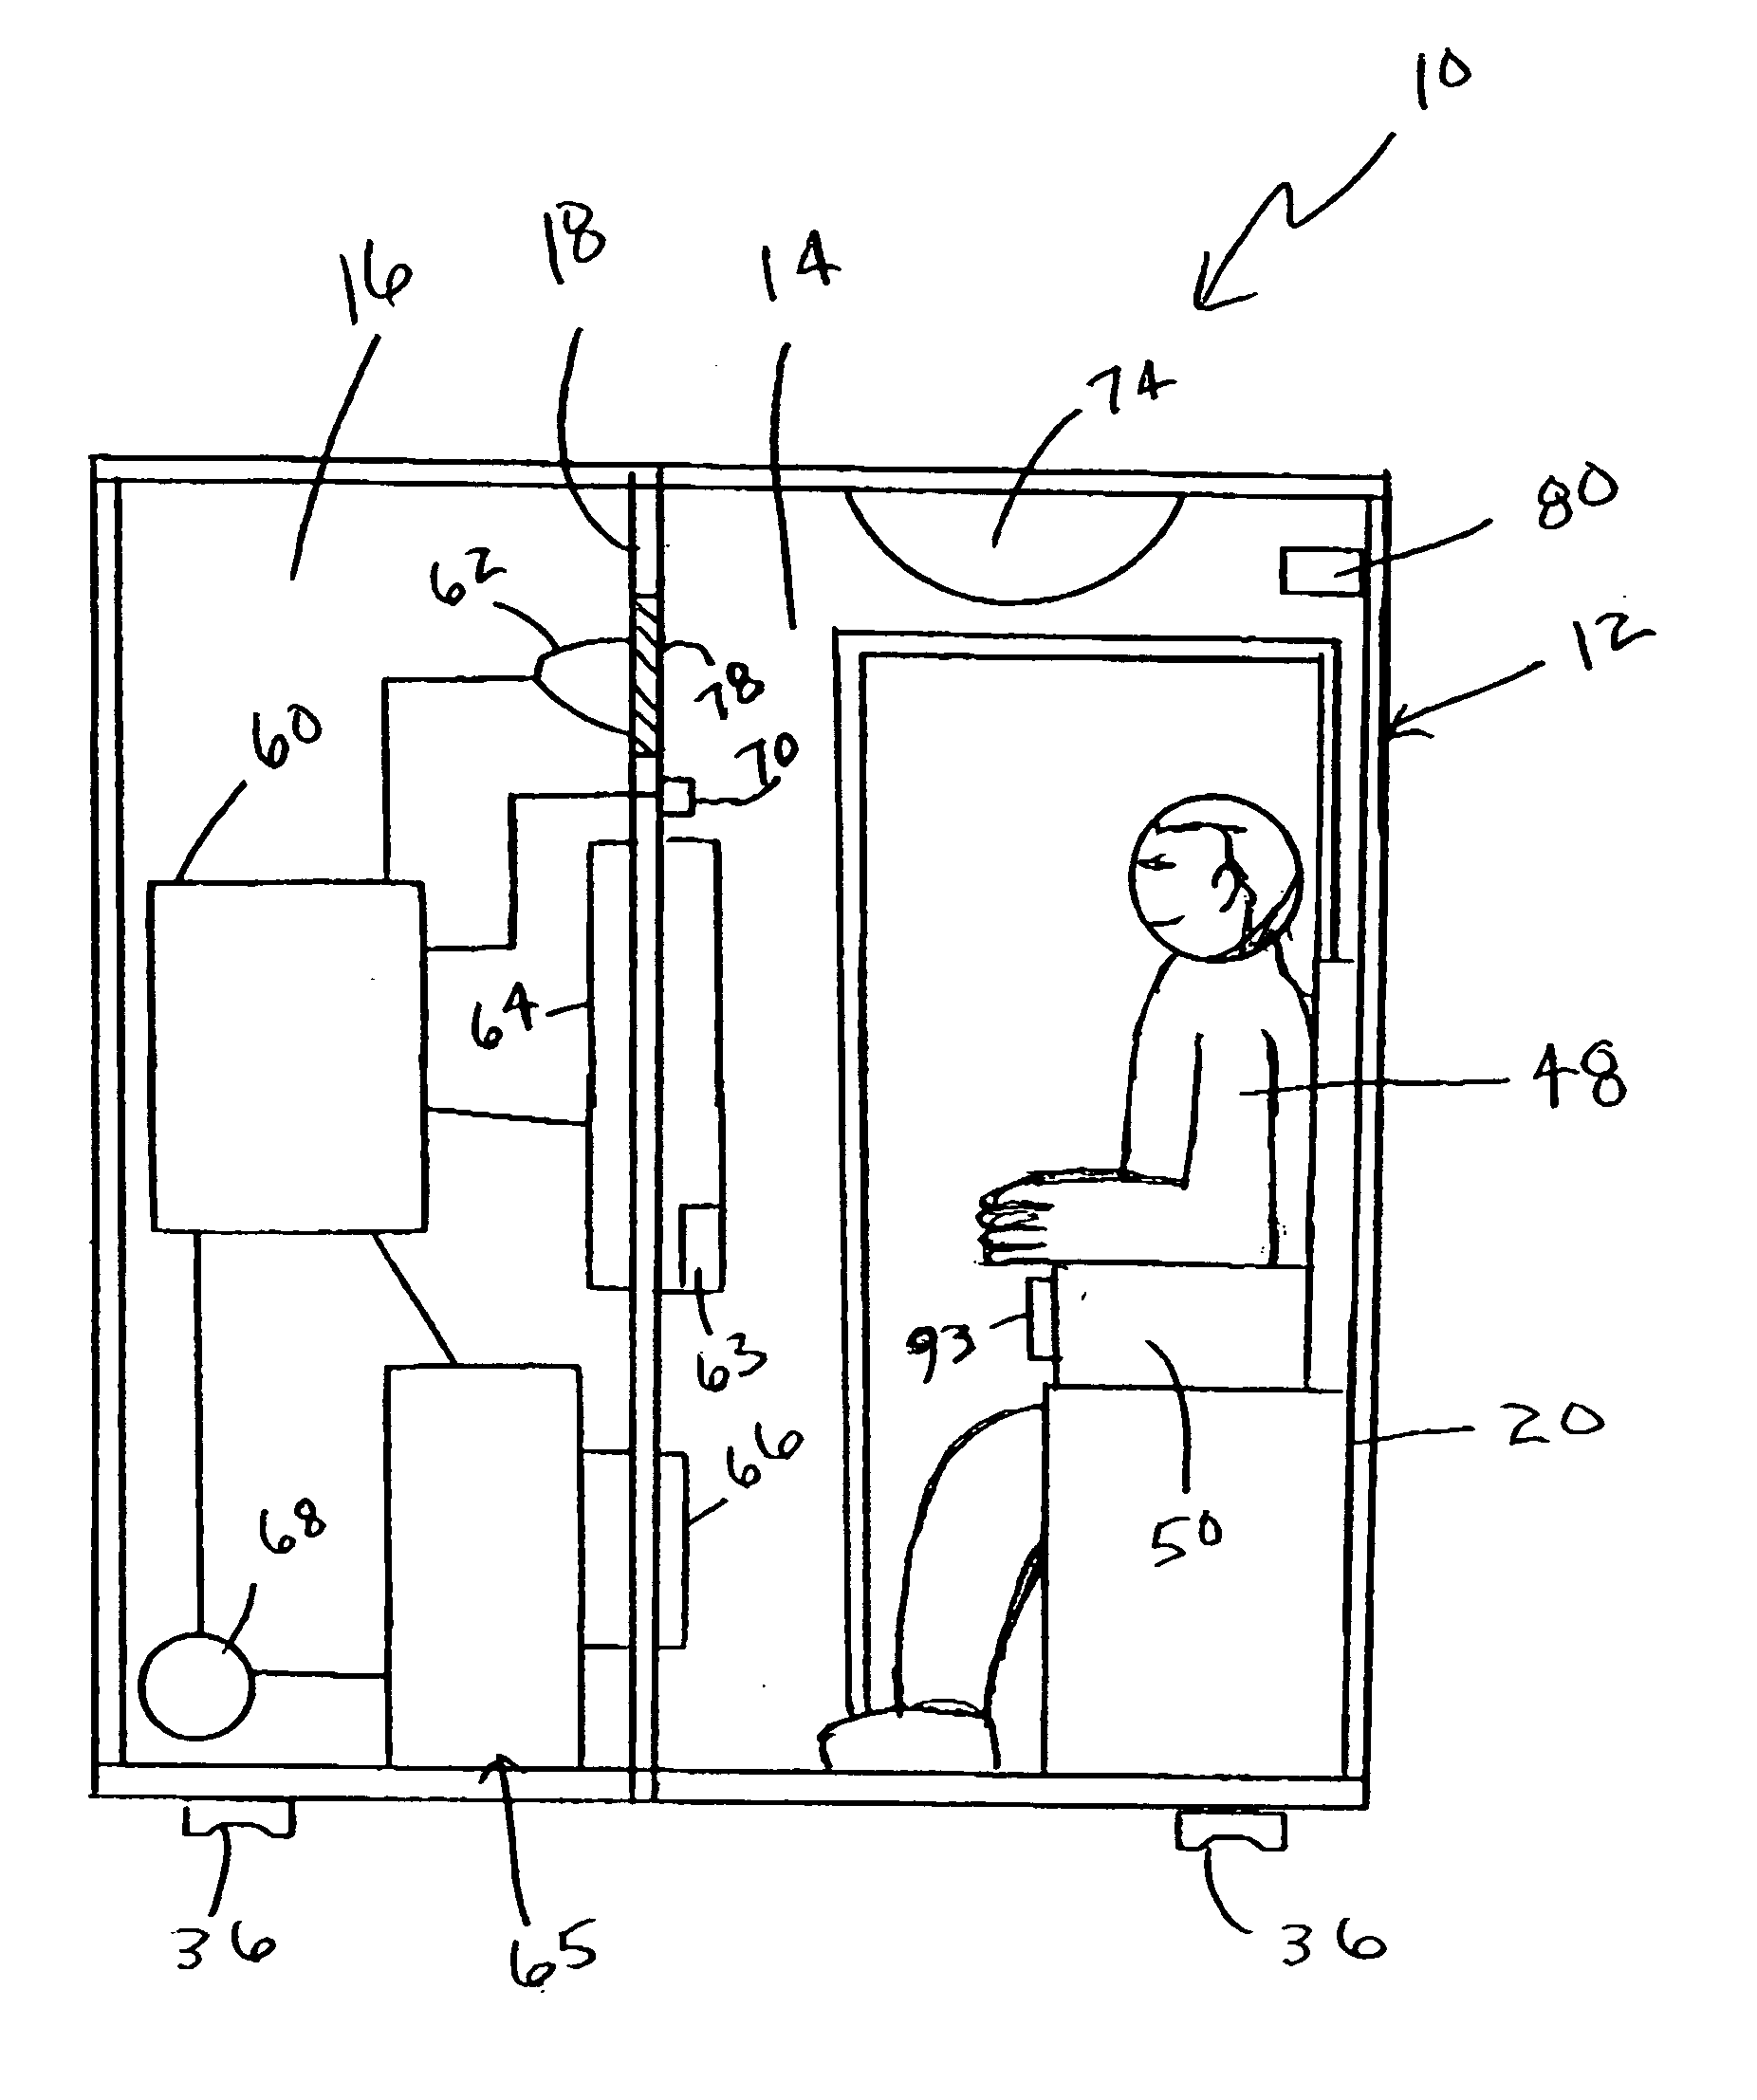 Controlled environment thermal image detection system and methods regarding same